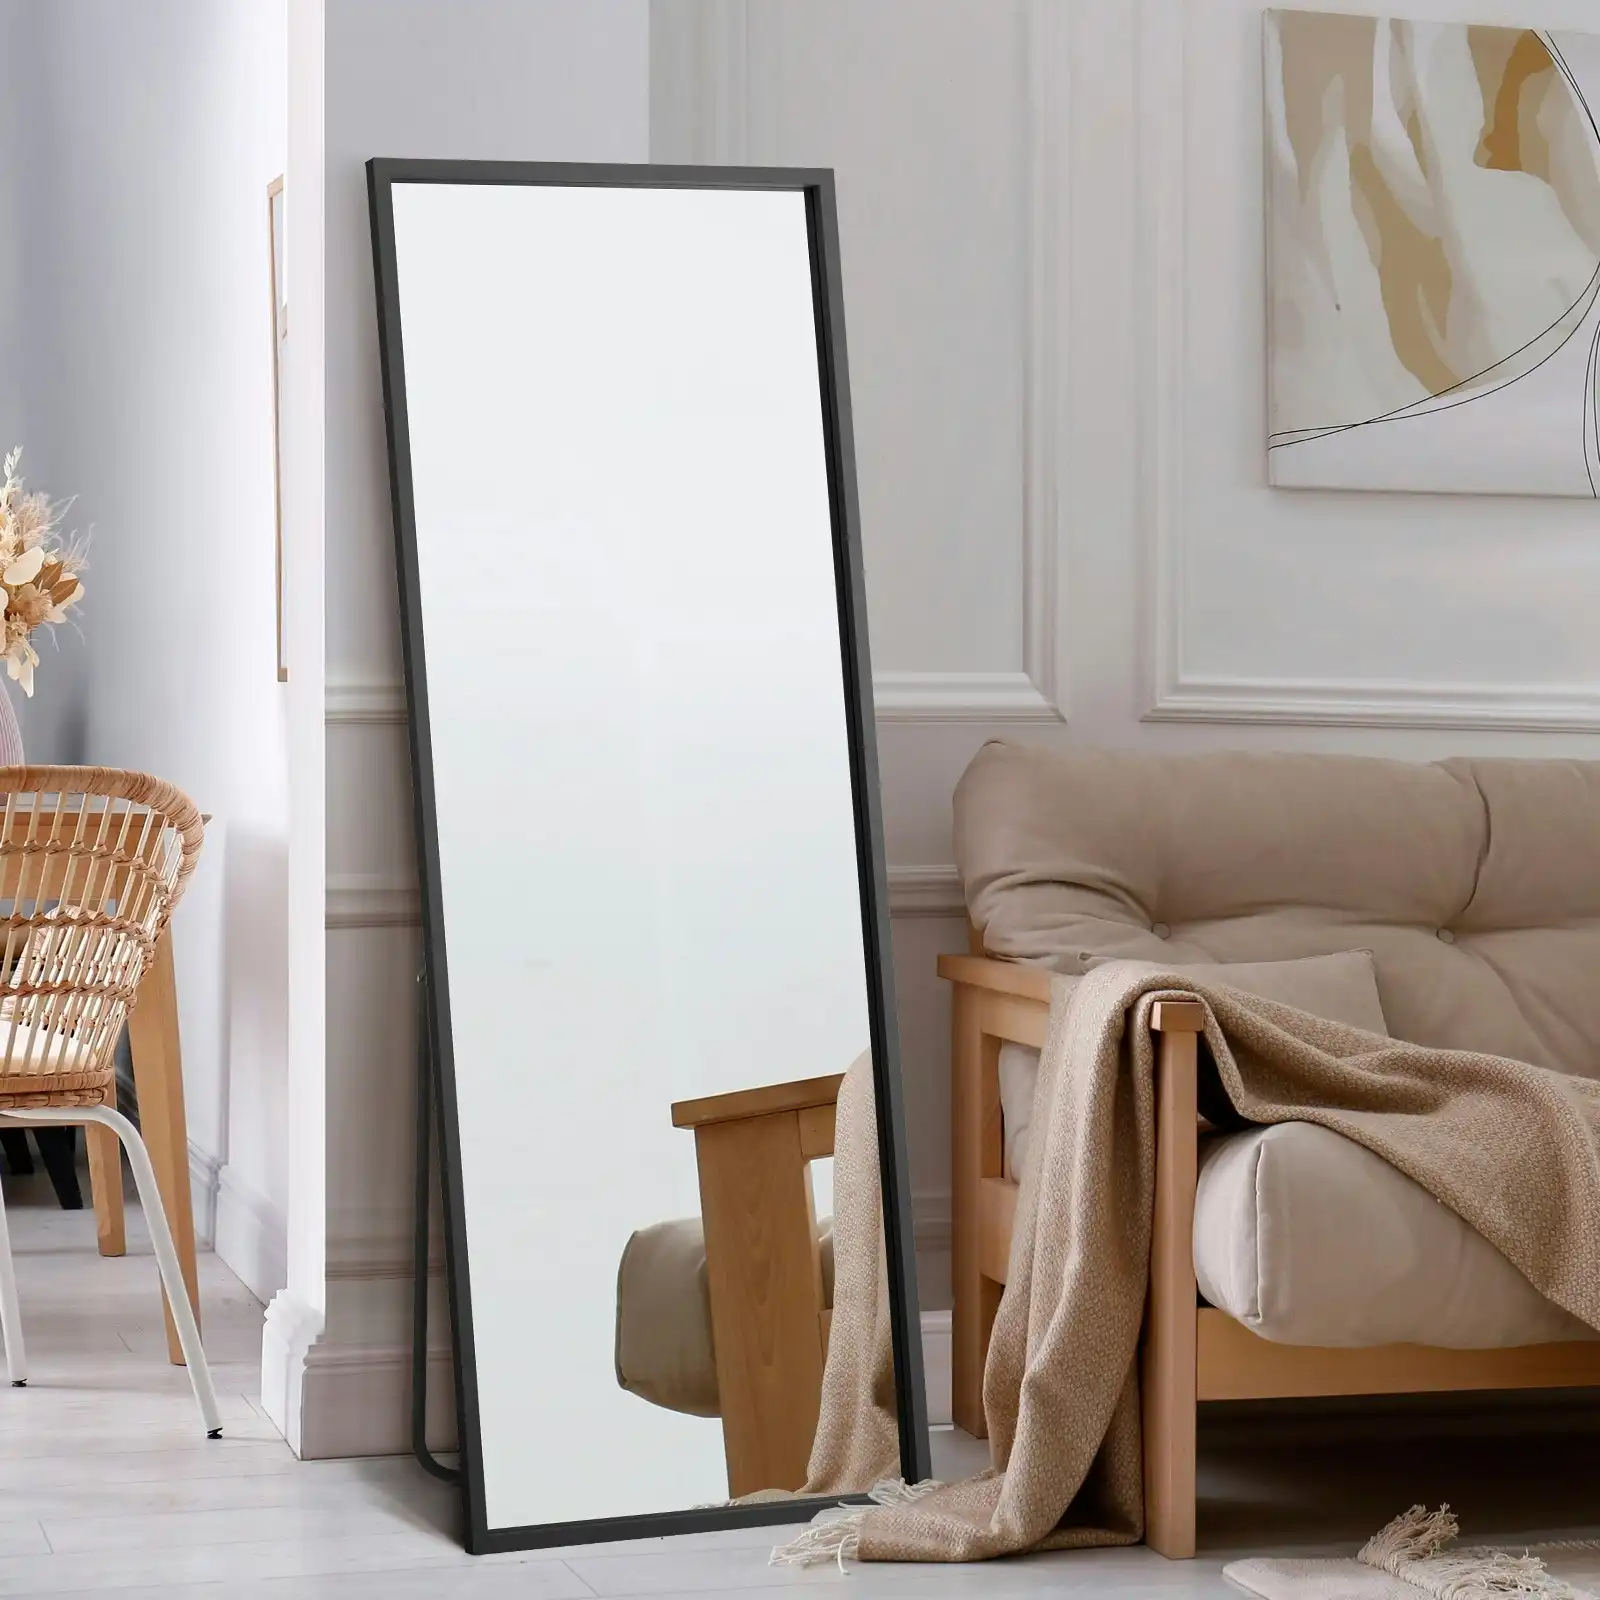 Oikiture Wooden 166x60cm Full Length Mirror Rectangle Floor Mirrors Free Standing Black